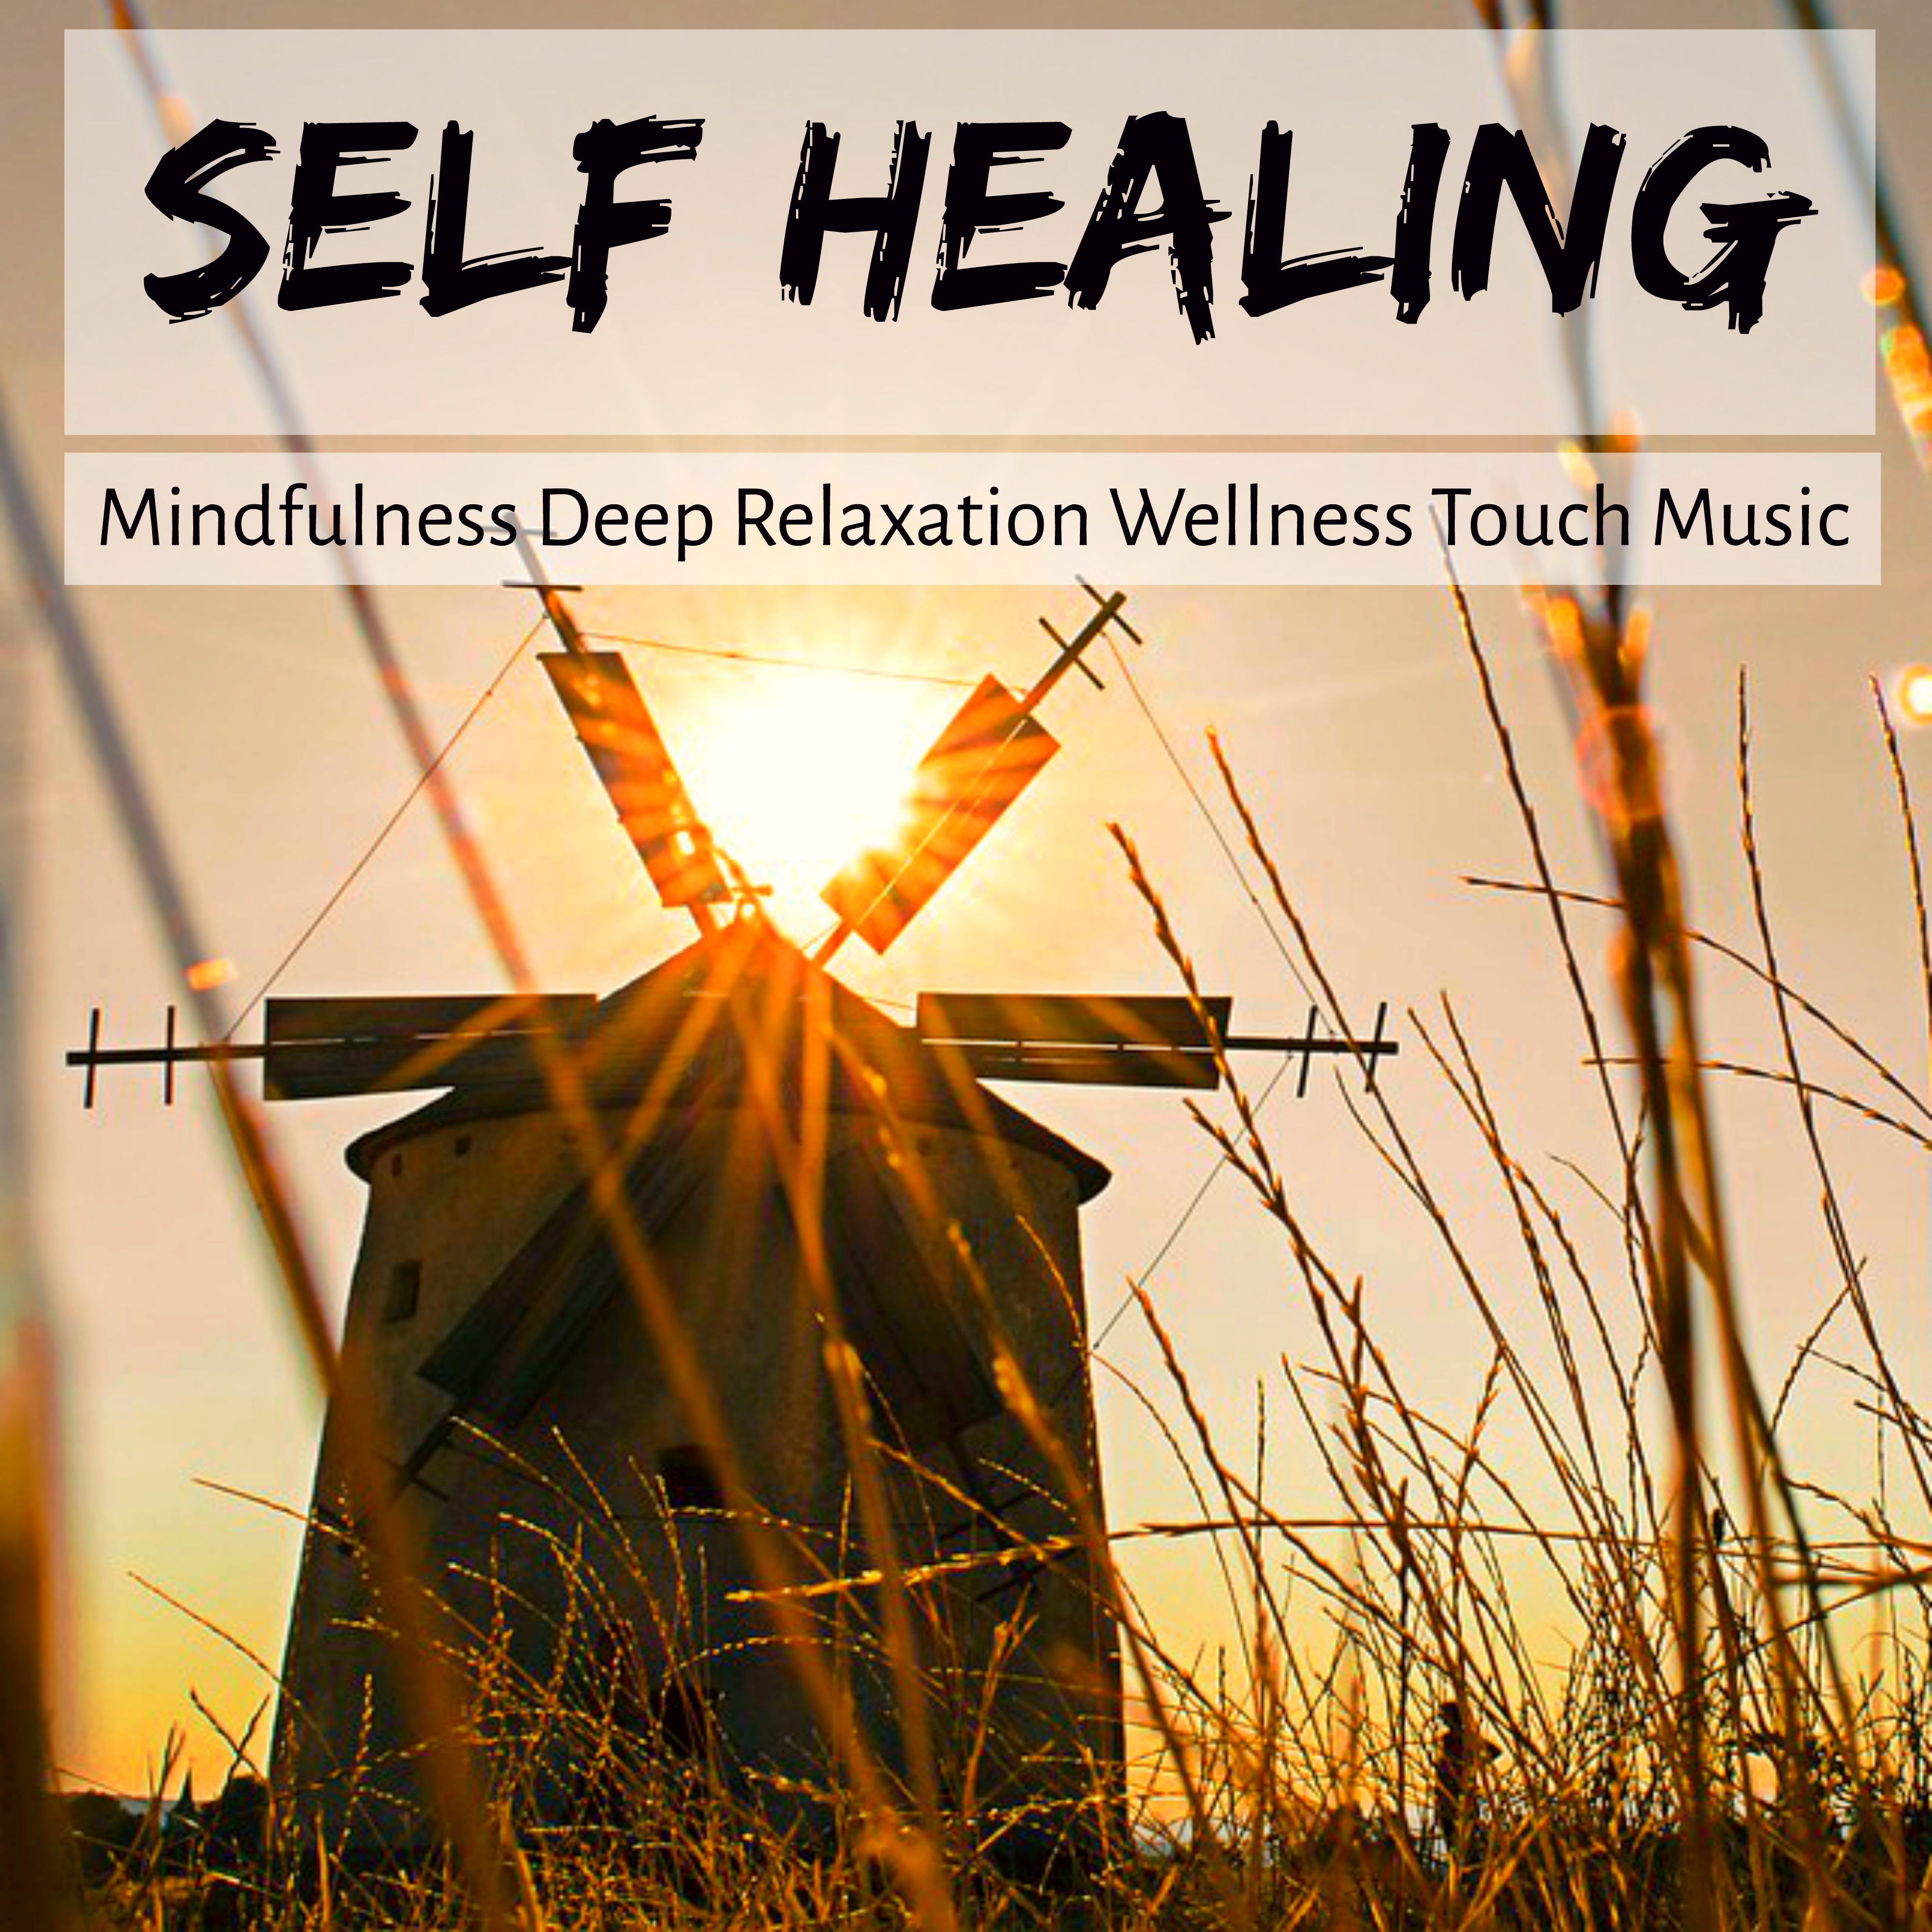 Self Healing - Mindfulness Deep Relaxation Wellness Touch Music for Peace Inside Reiki Treatment Pranic Energy with Soothing New Age Instrumental Nature Sounds